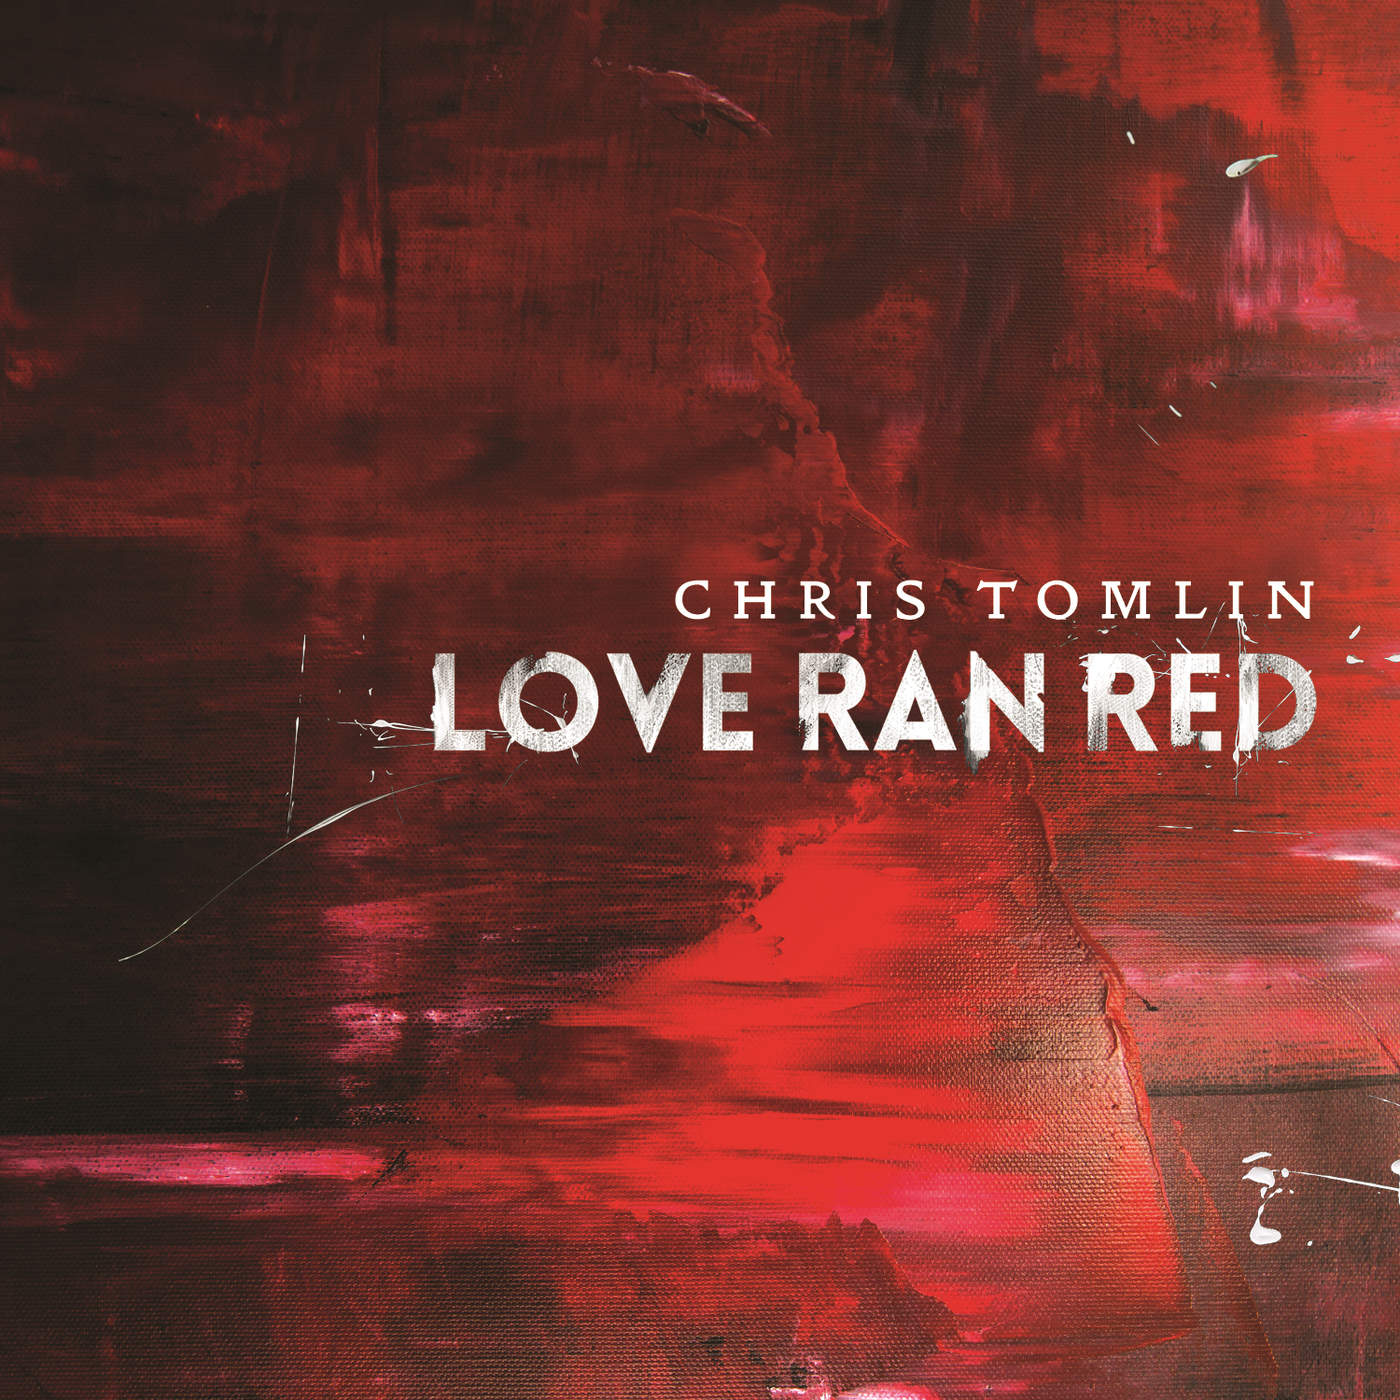 Art for At the Cross (Love Ran Red) by Chris Tomlin